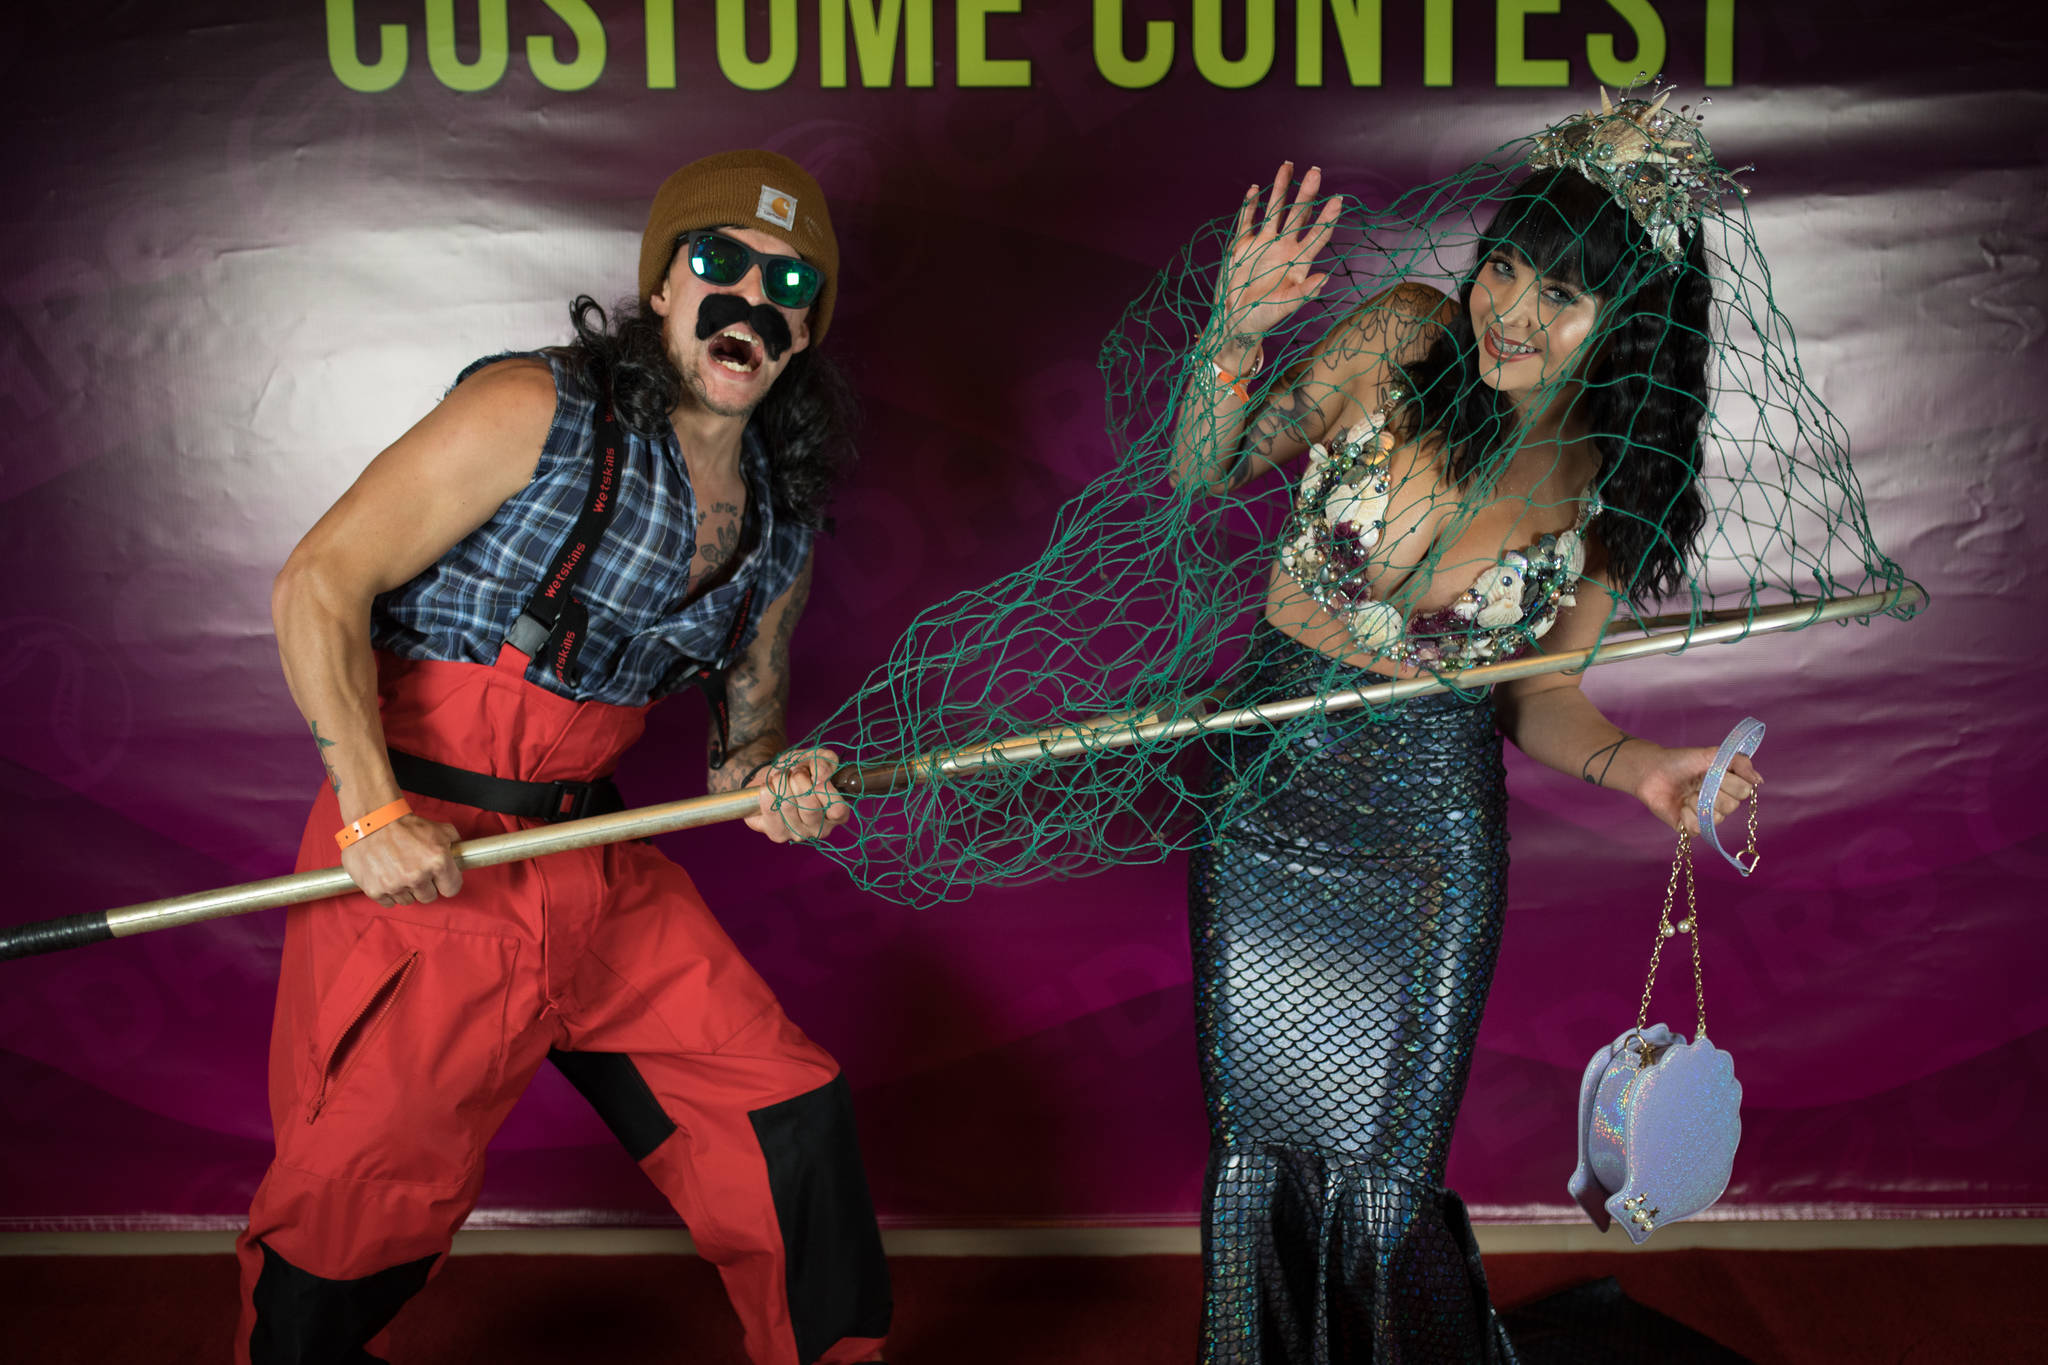 Jason Holden and Darian Kyniston won first prize in 7 Cedars Casino’s virtual costume contest for Halloween as a fisherman and mermaid. They won $500. Photo by Stephanie Gray Photography